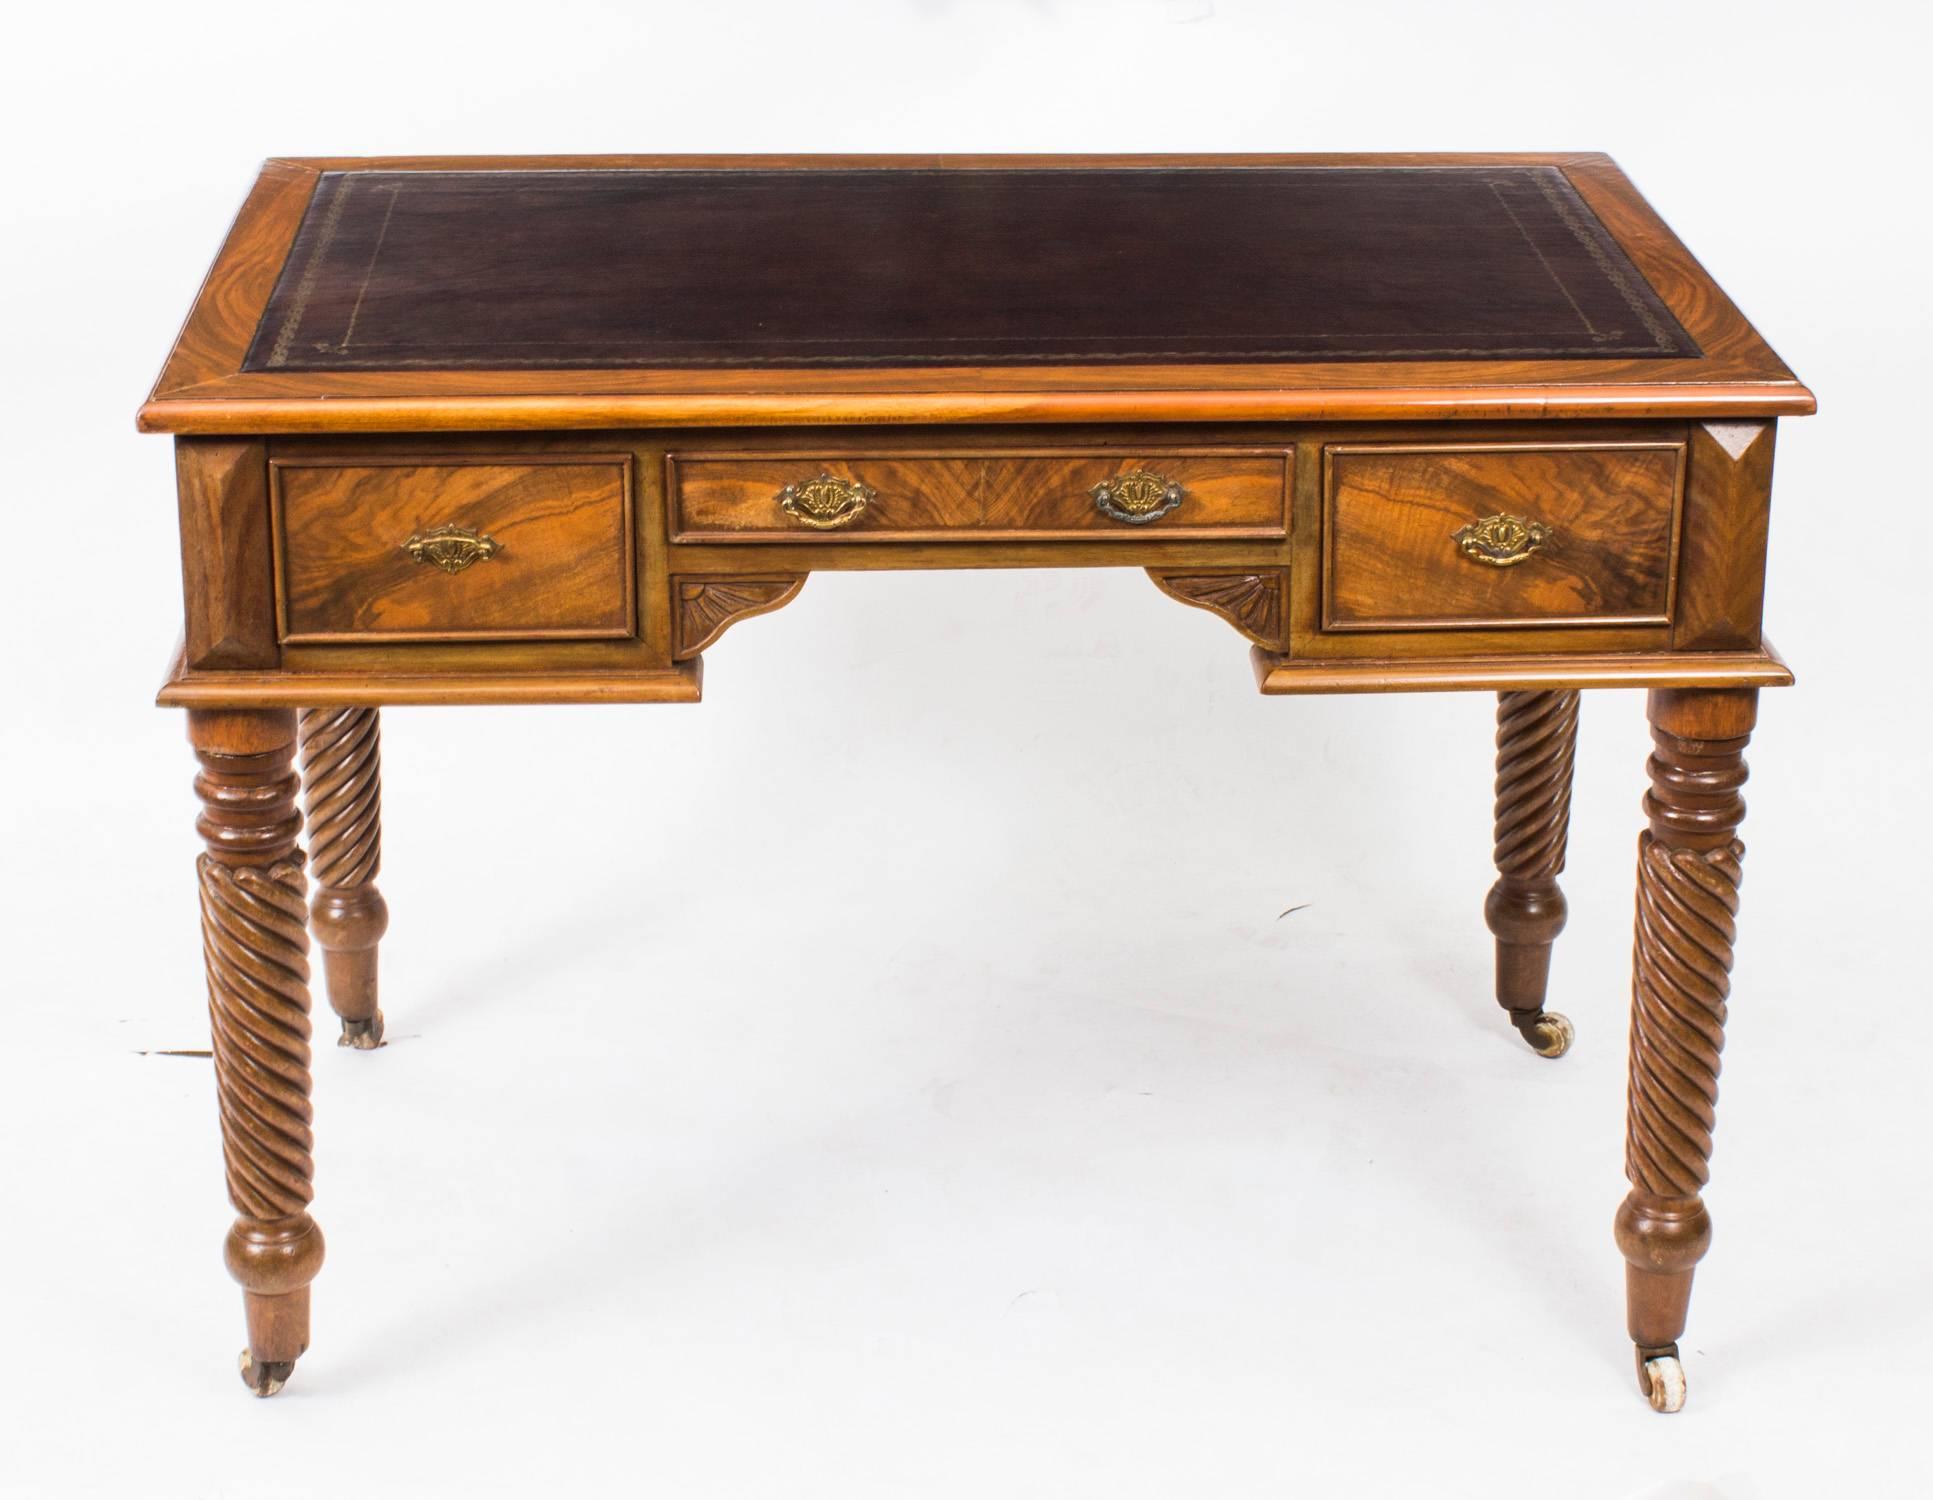 This is a very nice example of an antique writing table which has been superbly made from top quality figured walnut. It has been made, in the Victorian manner, and we have dated it to around 1900 which was almost at the end of Queen Victoria’s